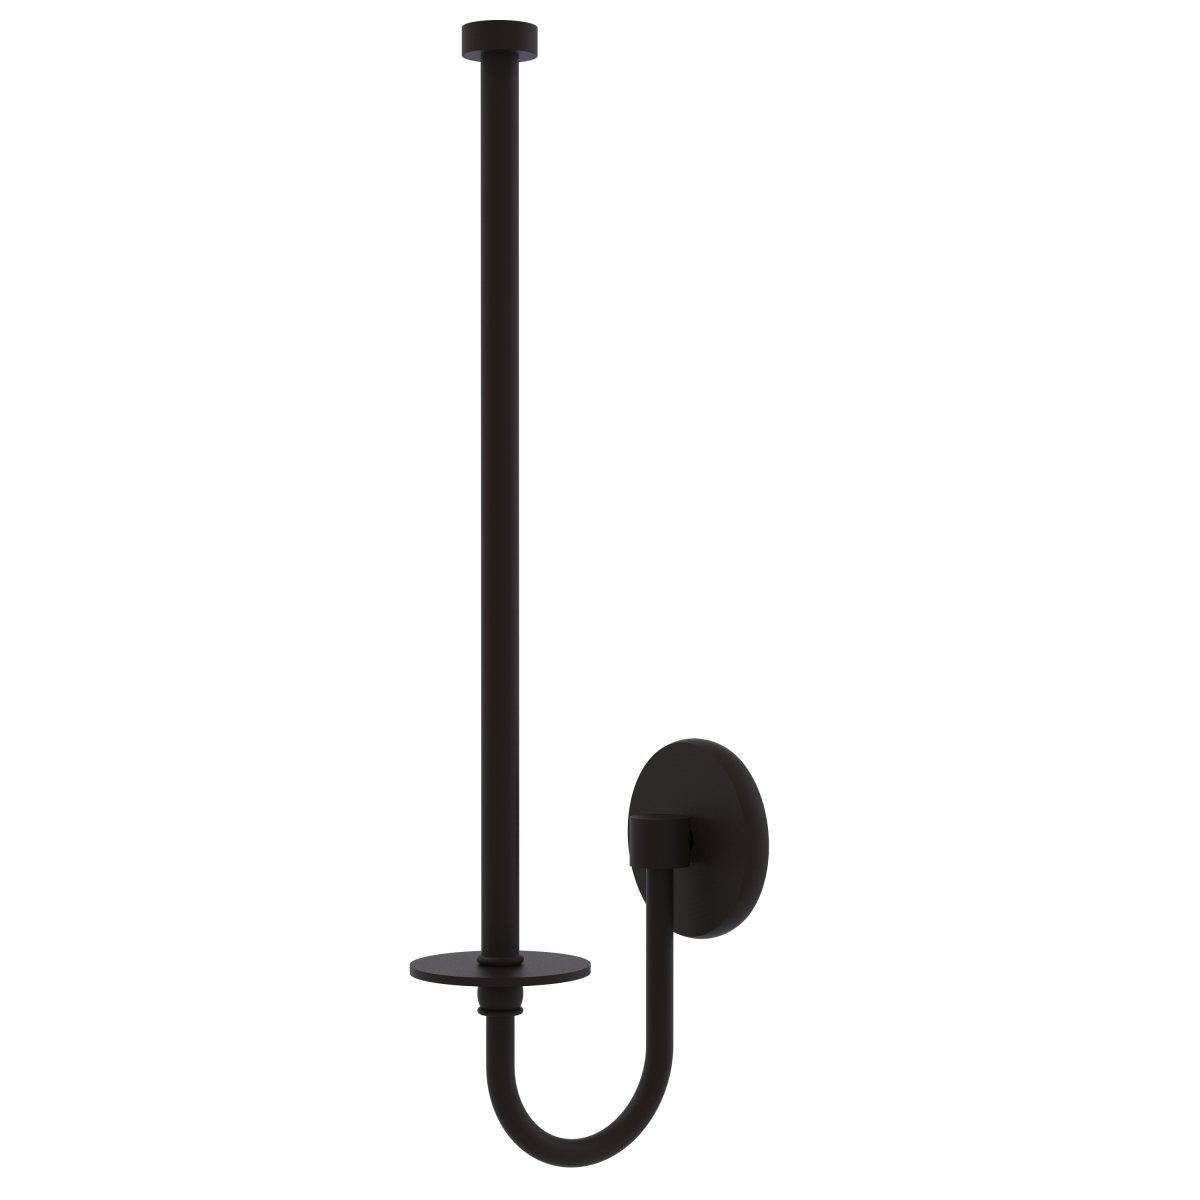 1025u-orb Skyline Collection Wall Mounted Paper Towel Holder, Oil Rubbed Bronze